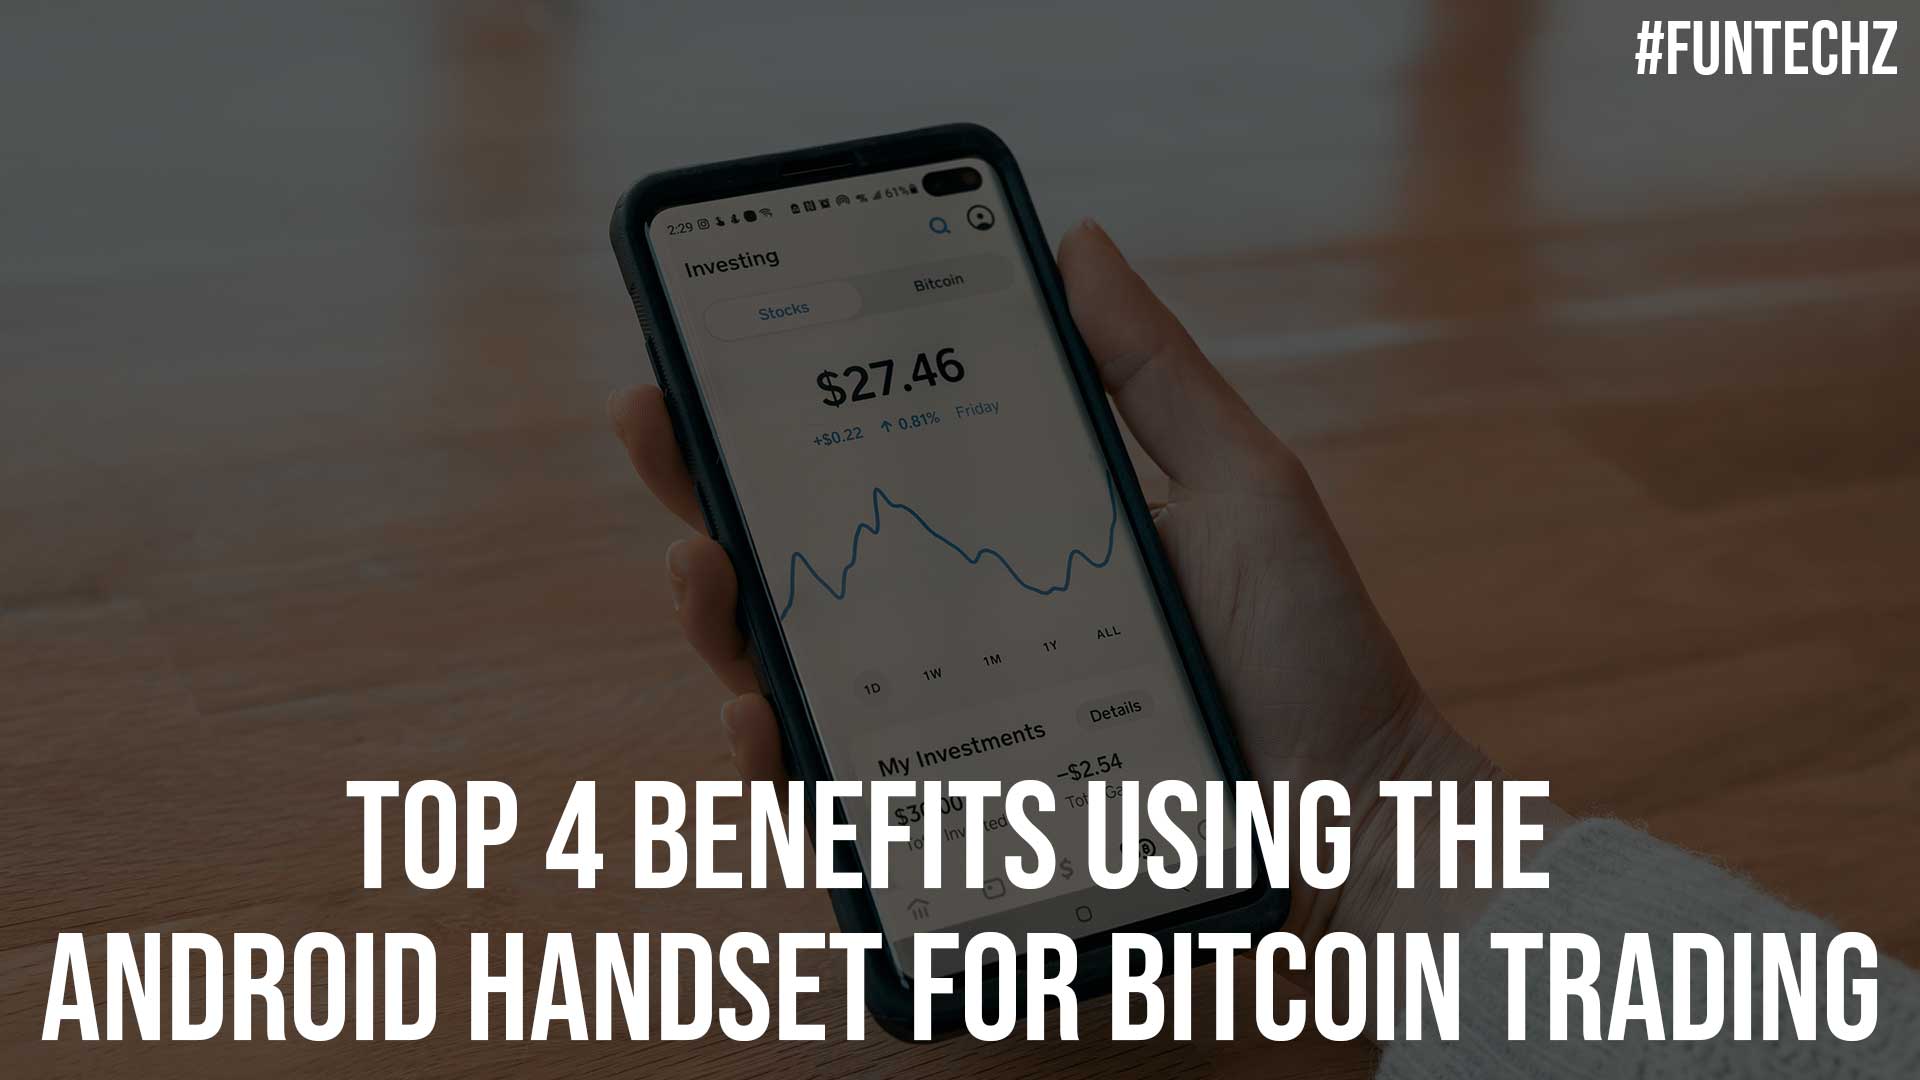 Top 4 Benefits Using the Android Handset for Bitcoin Trading